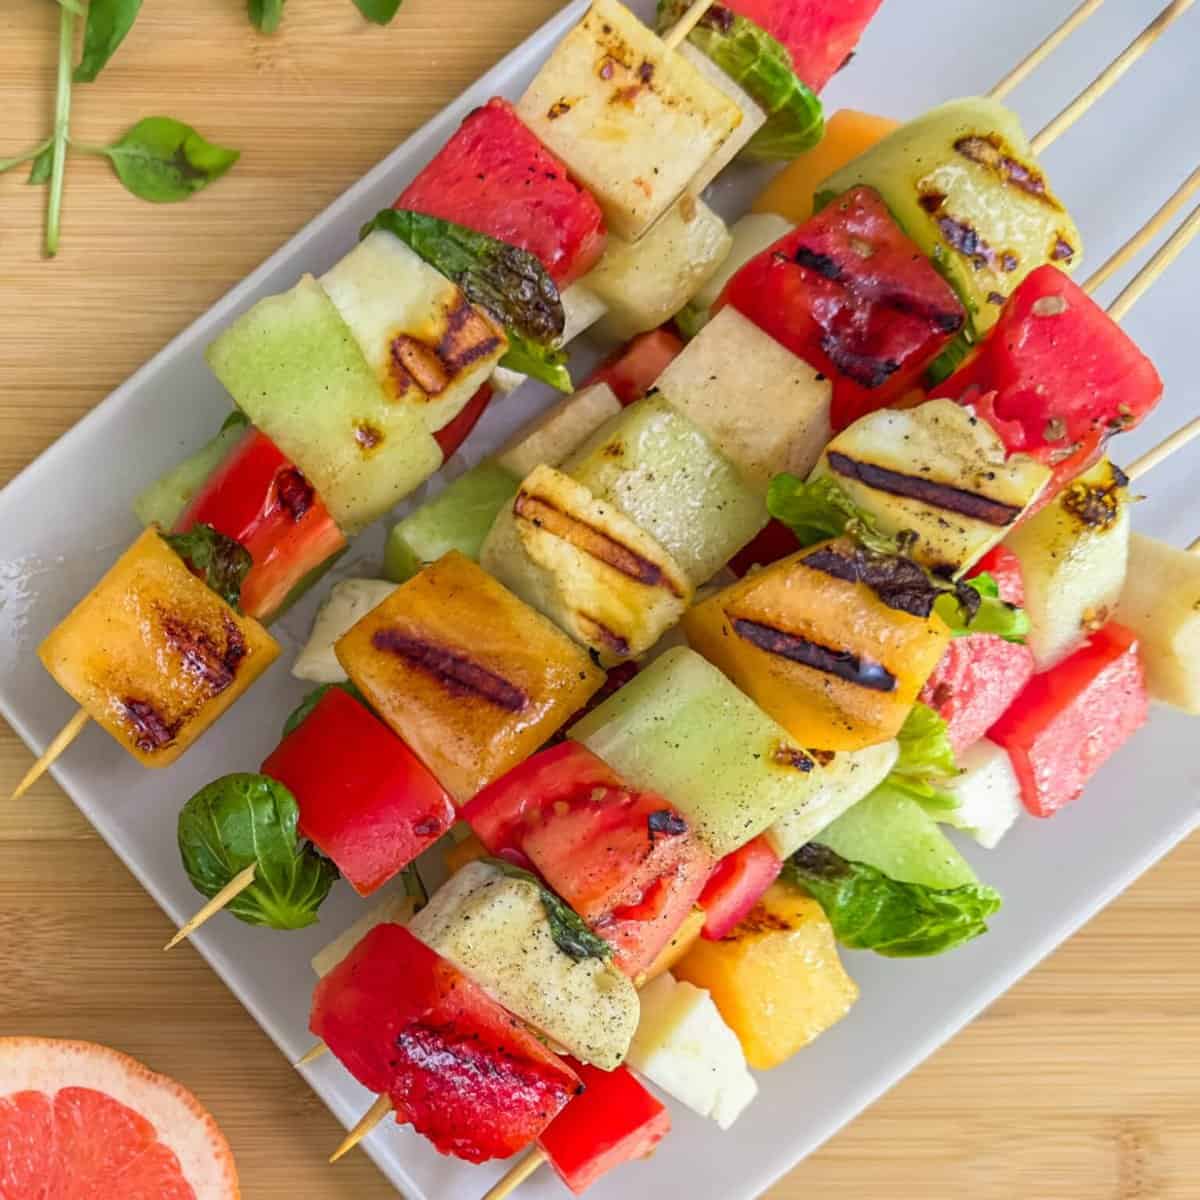 Jerry James Stone's melon Skewers